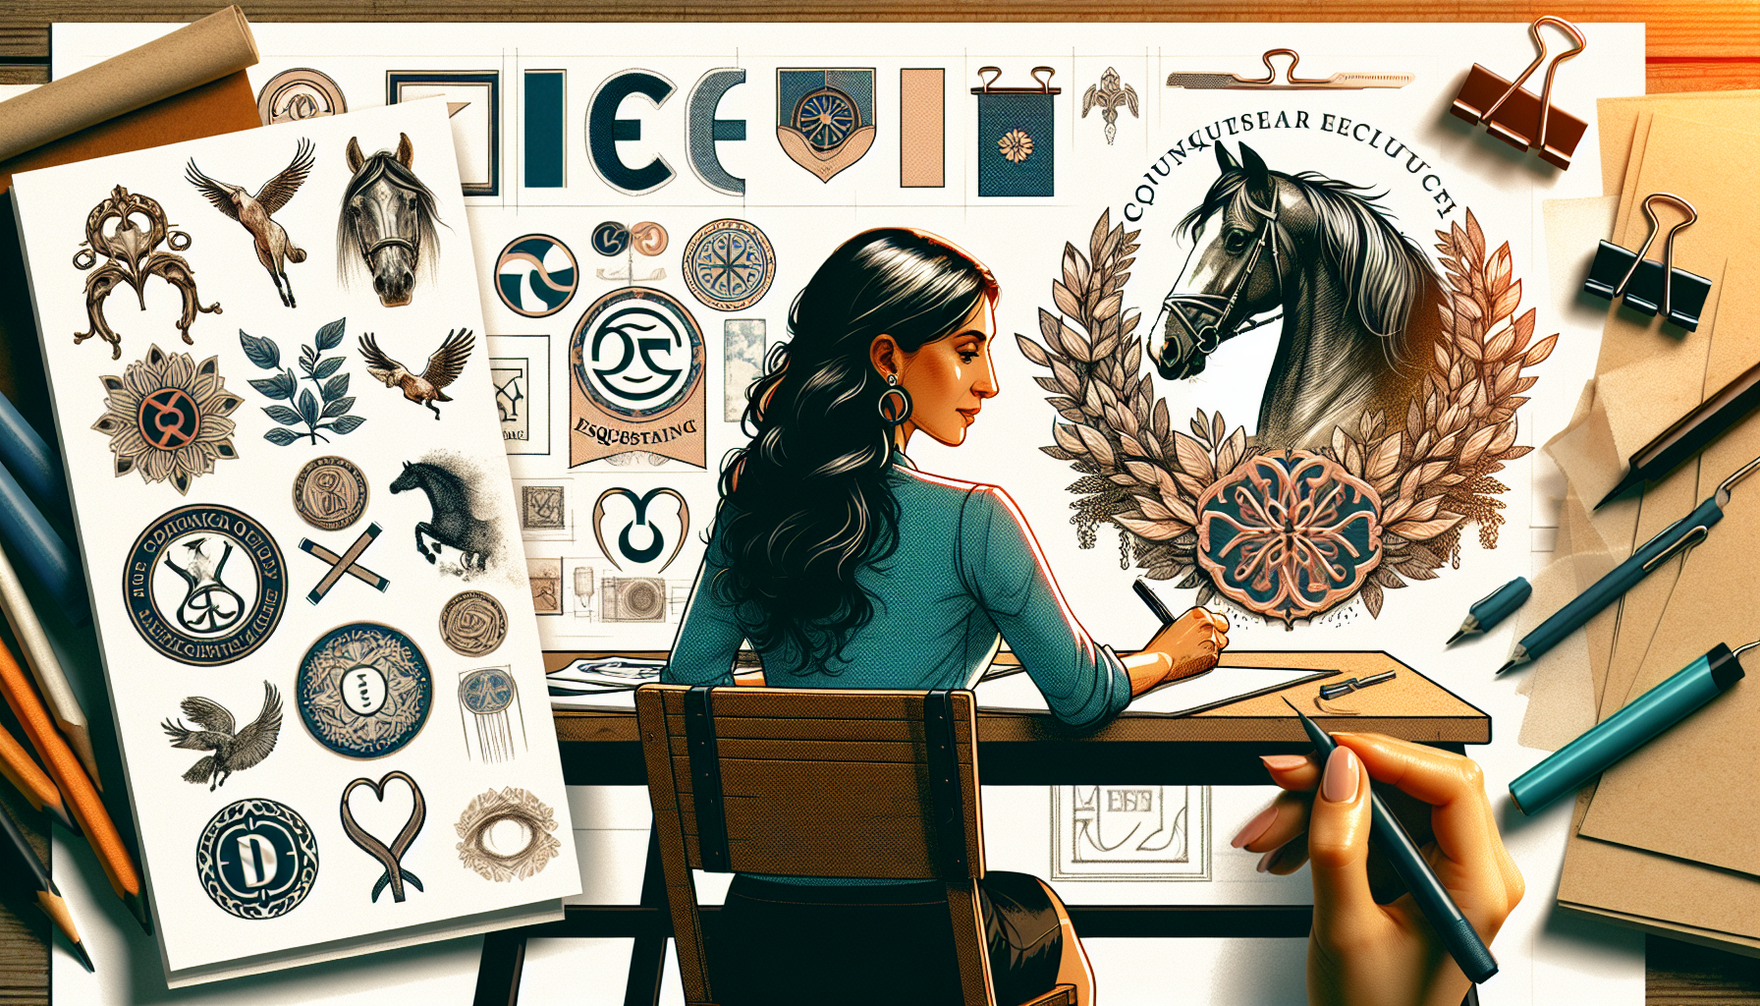 An illustration showing the meticulous process of conveying equestrian culture through symbolism and design elements in a unique branding style. The image can focus on different areas such as logo cre